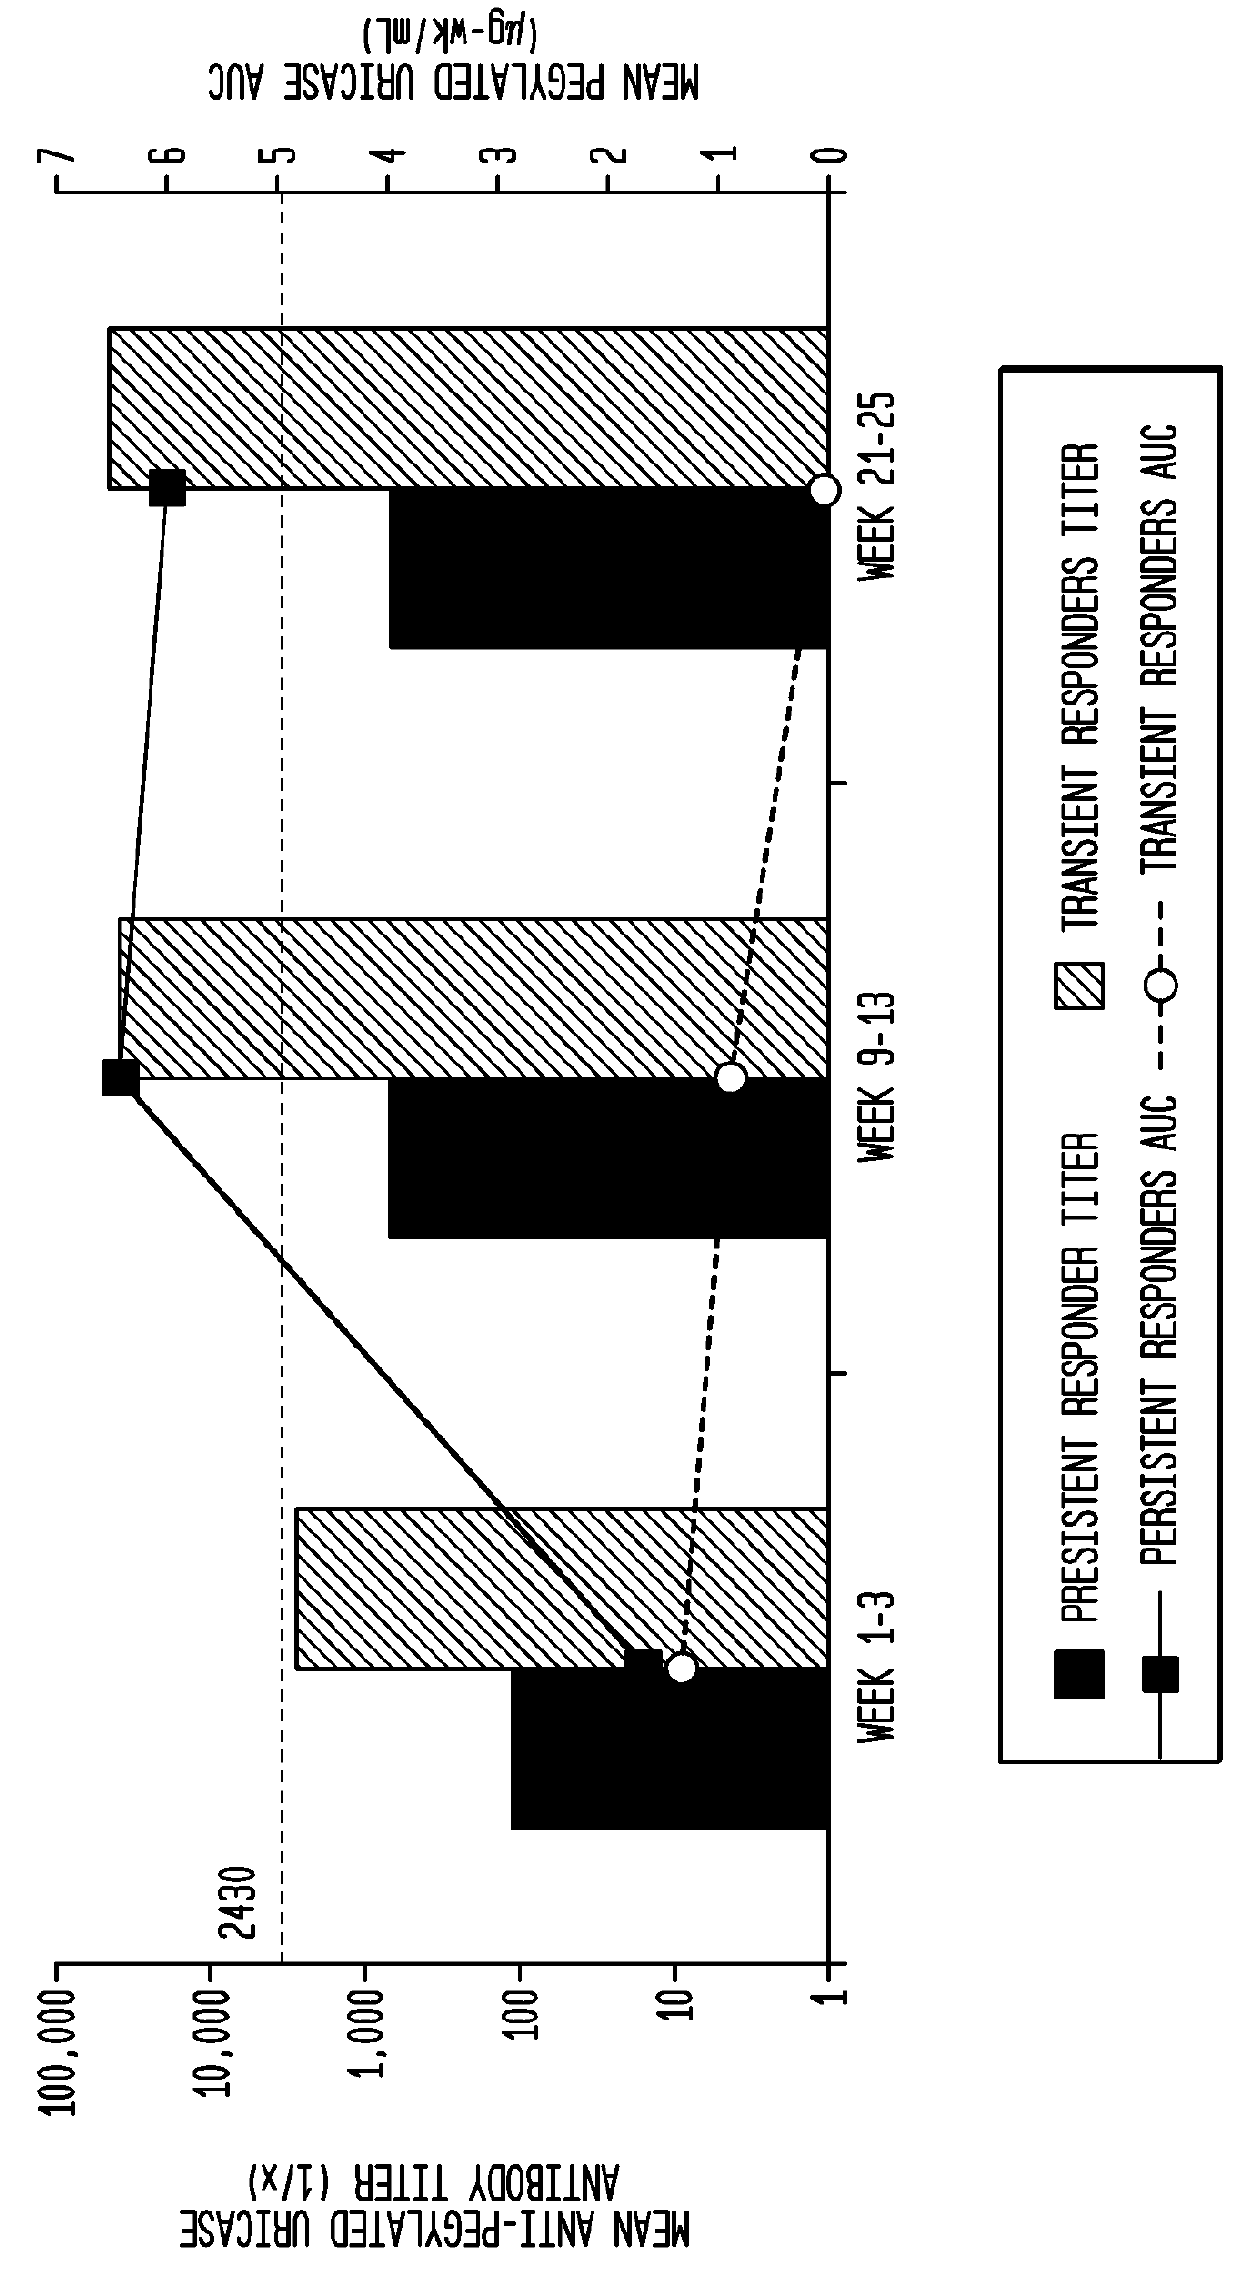 Methods and kits for predicting infusion reaction risk and antibody-mediated loss of response by monitoring serum uric acid during pegylated uricase therapy